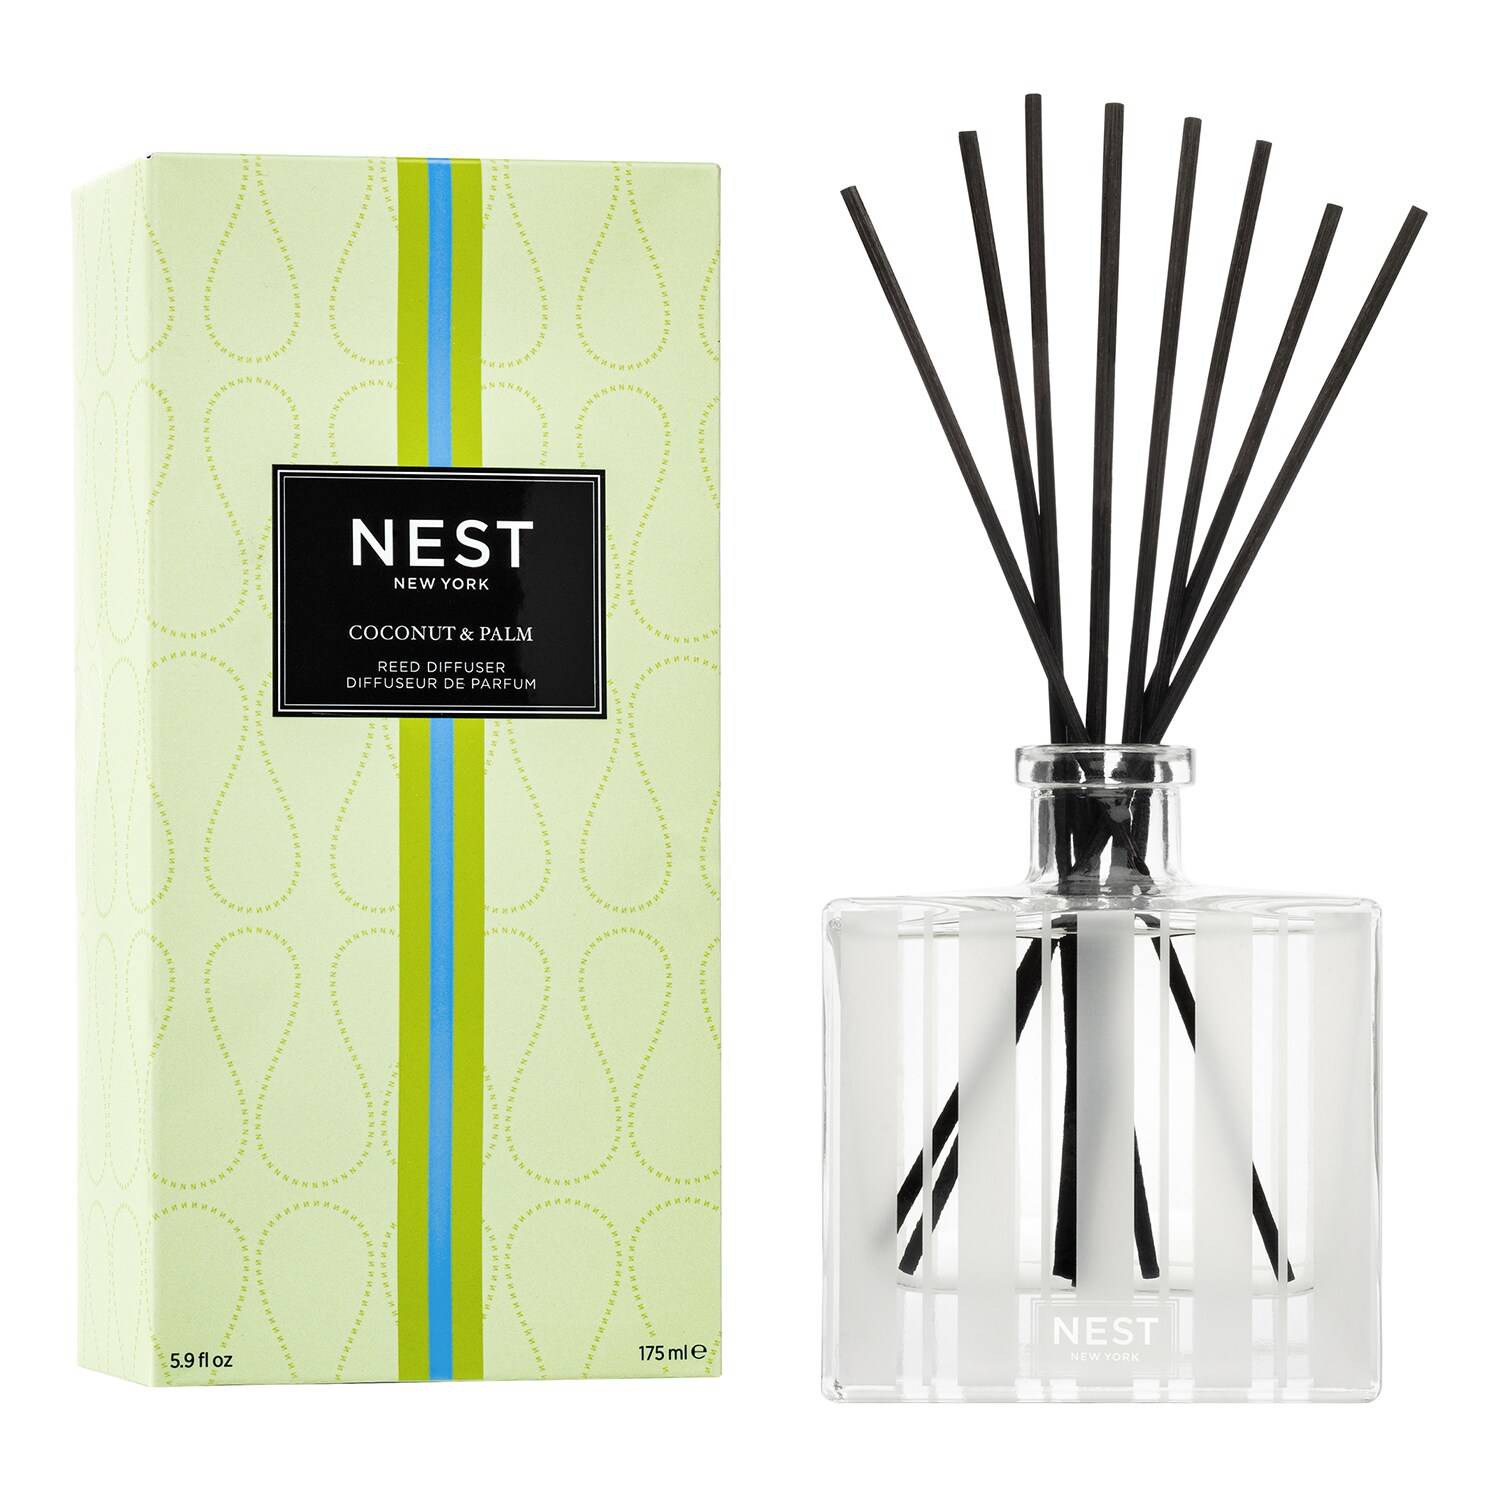 Nest New York Coconut & Palm Reed Diffuser 175G